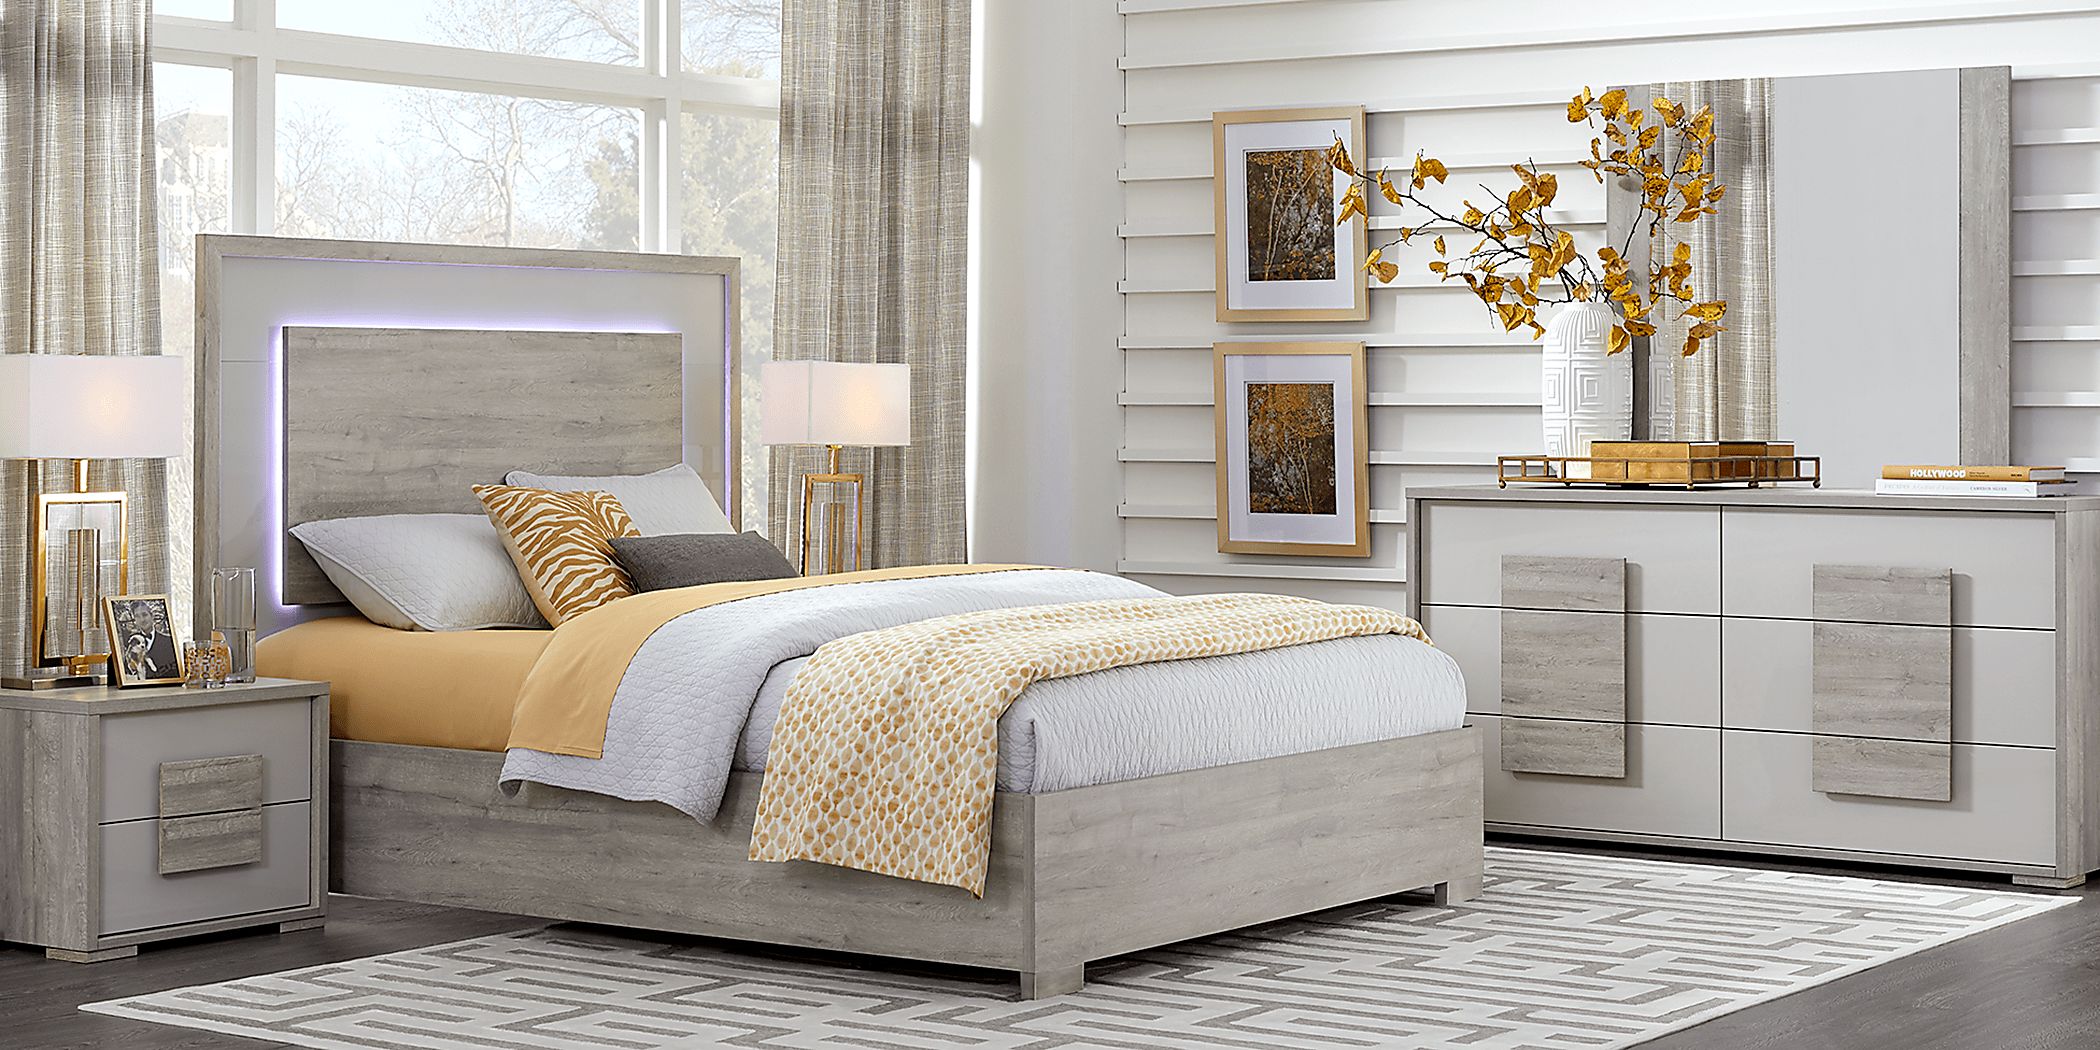 Rooms To Go Master bedroom Set, King for Sale in Orlando, FL